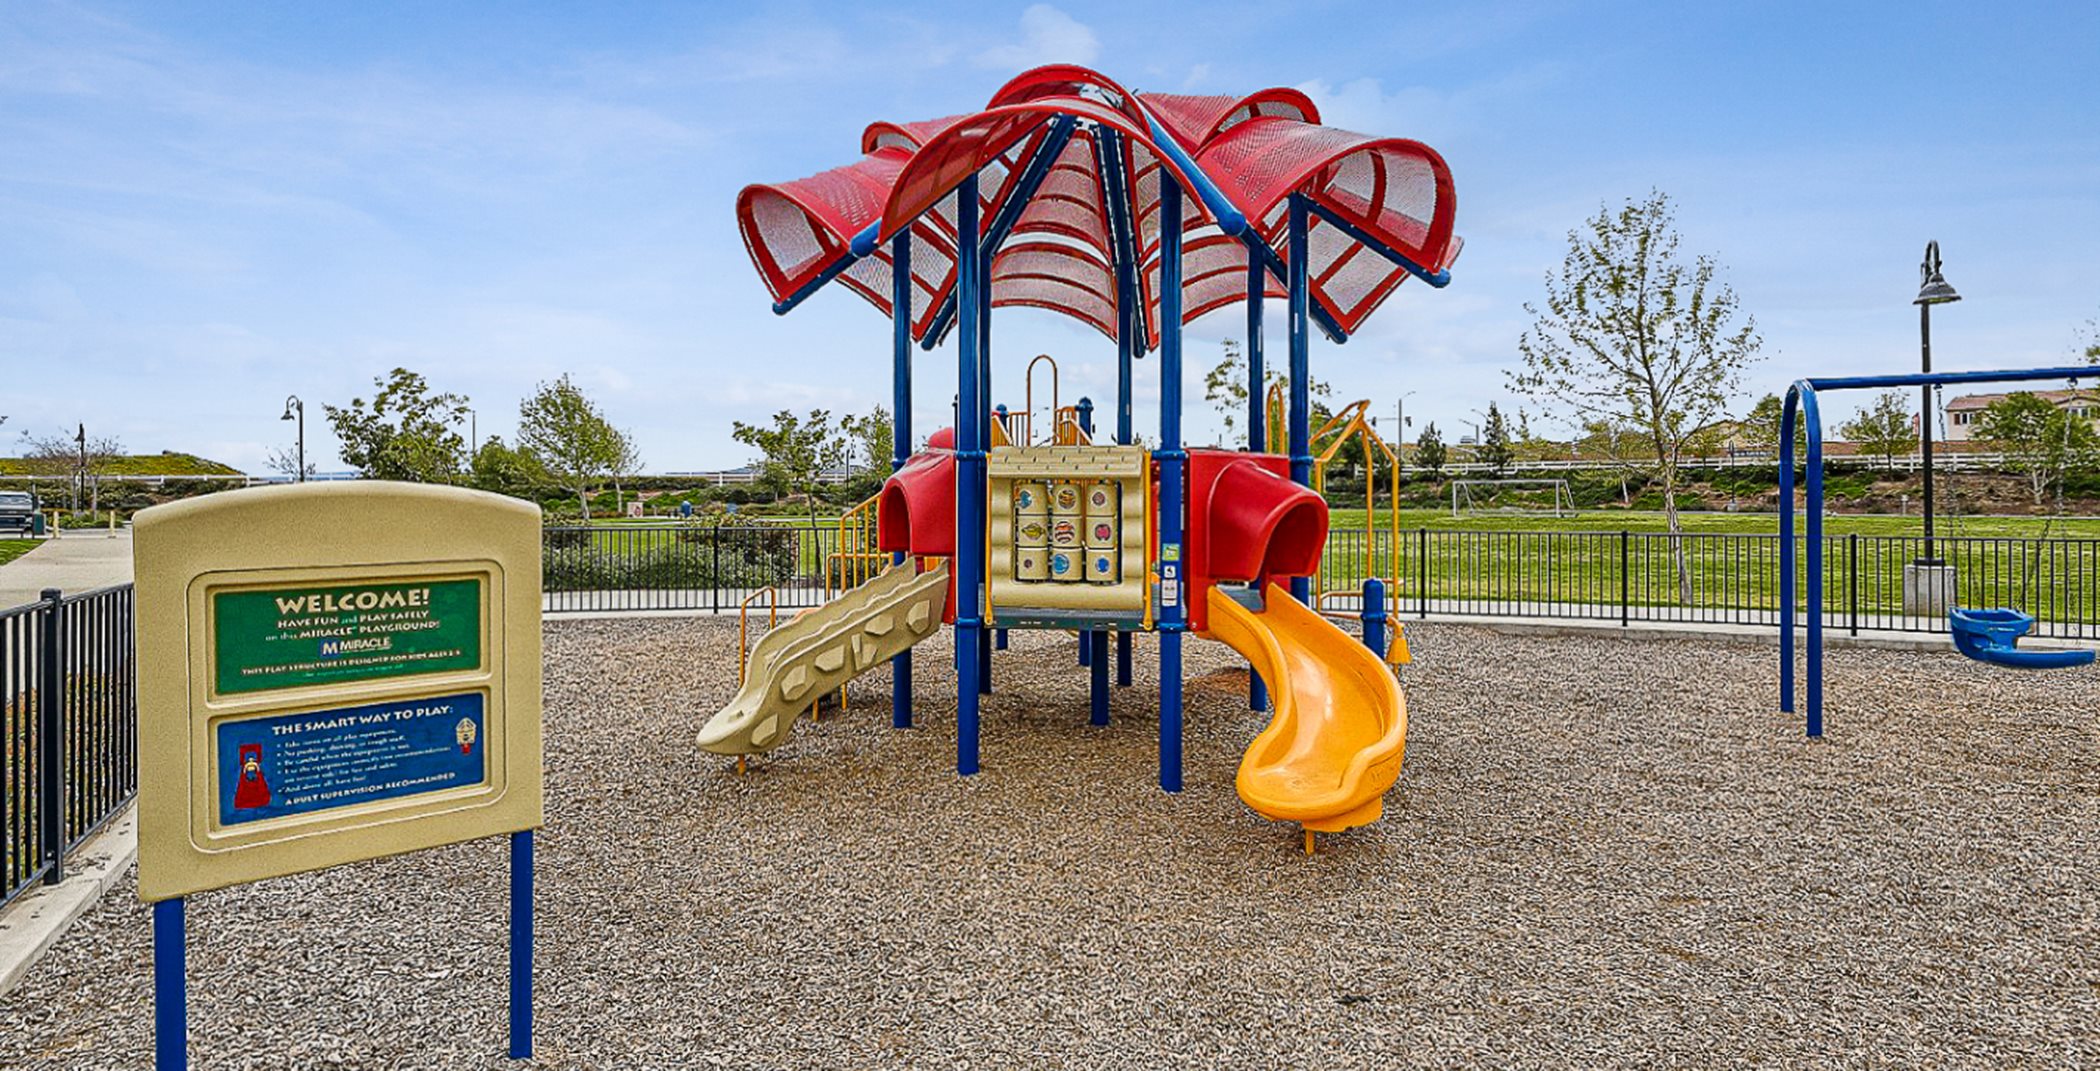 Playset at the park with two slides